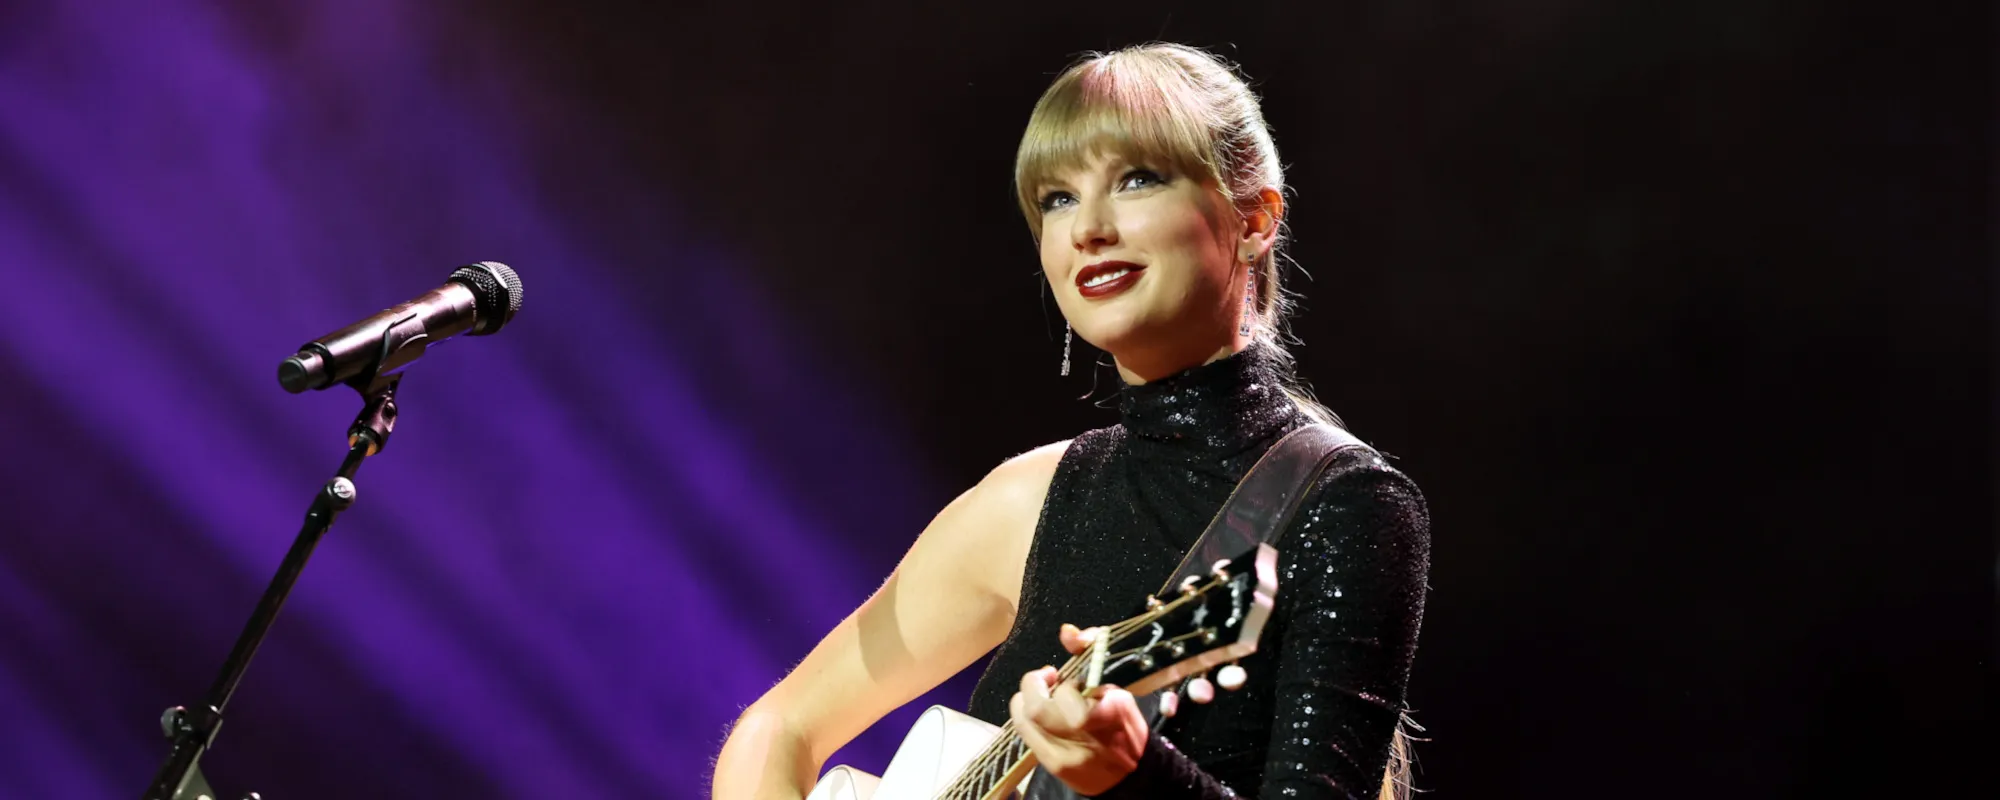 Glendale, Arizona Changes Name to “Swift City” in Honor of Taylor Swift’s Upcoming Shows